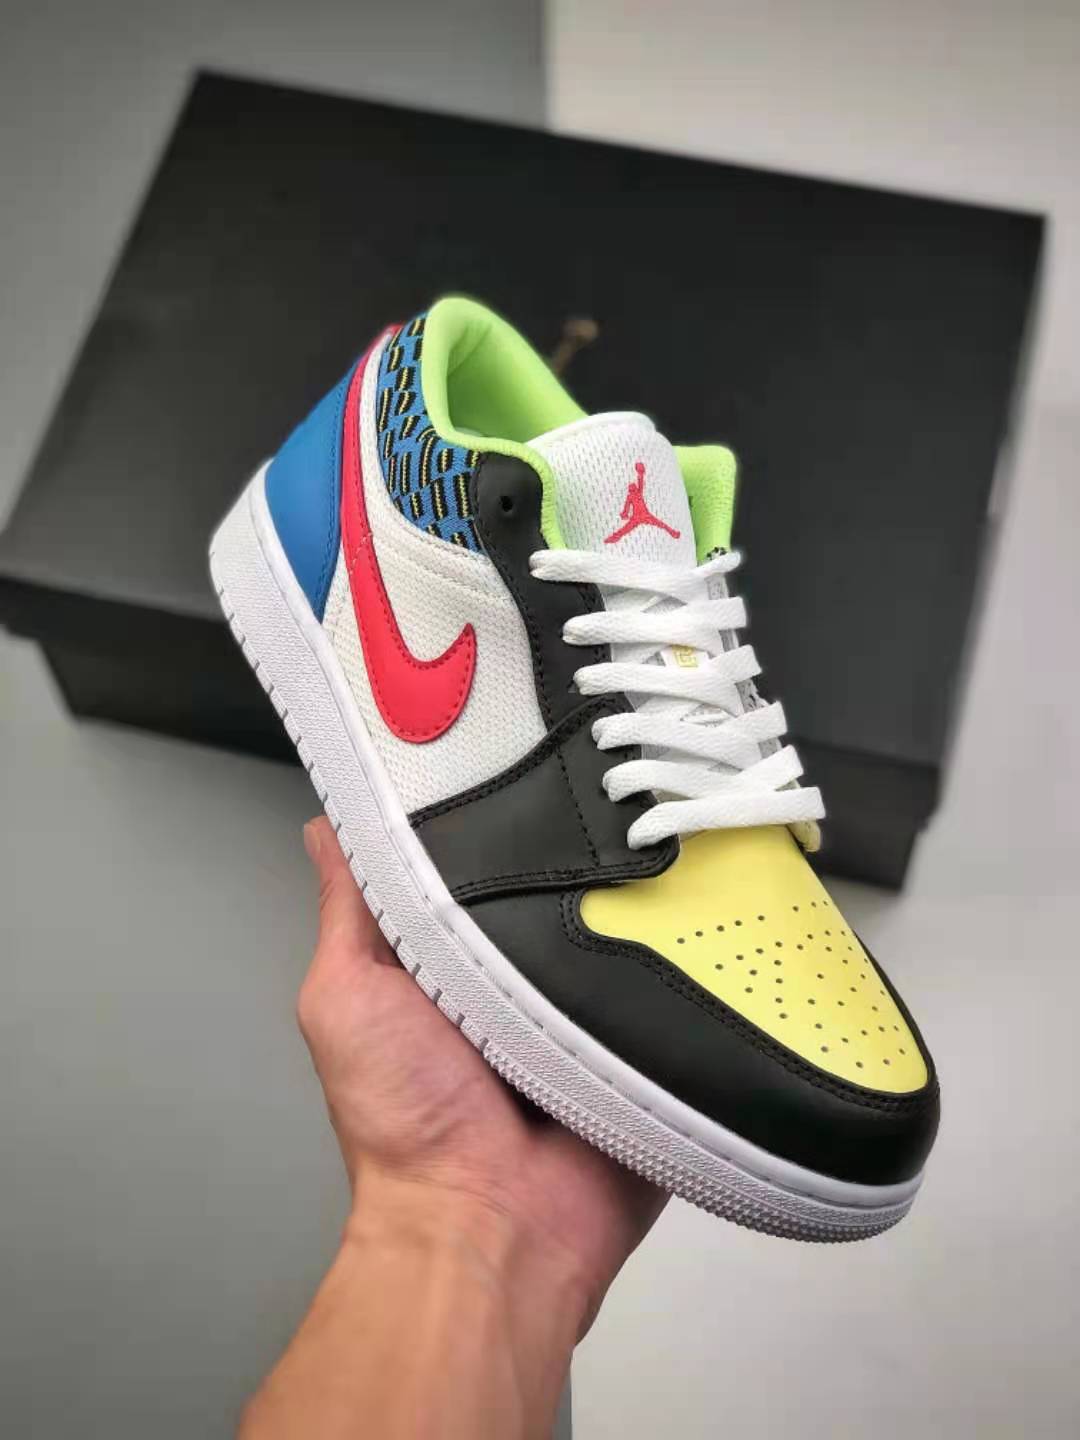 Air Jordan 1 Low 'Funky Patterns' DH5927-006 - Trendy and Unique Sneakers